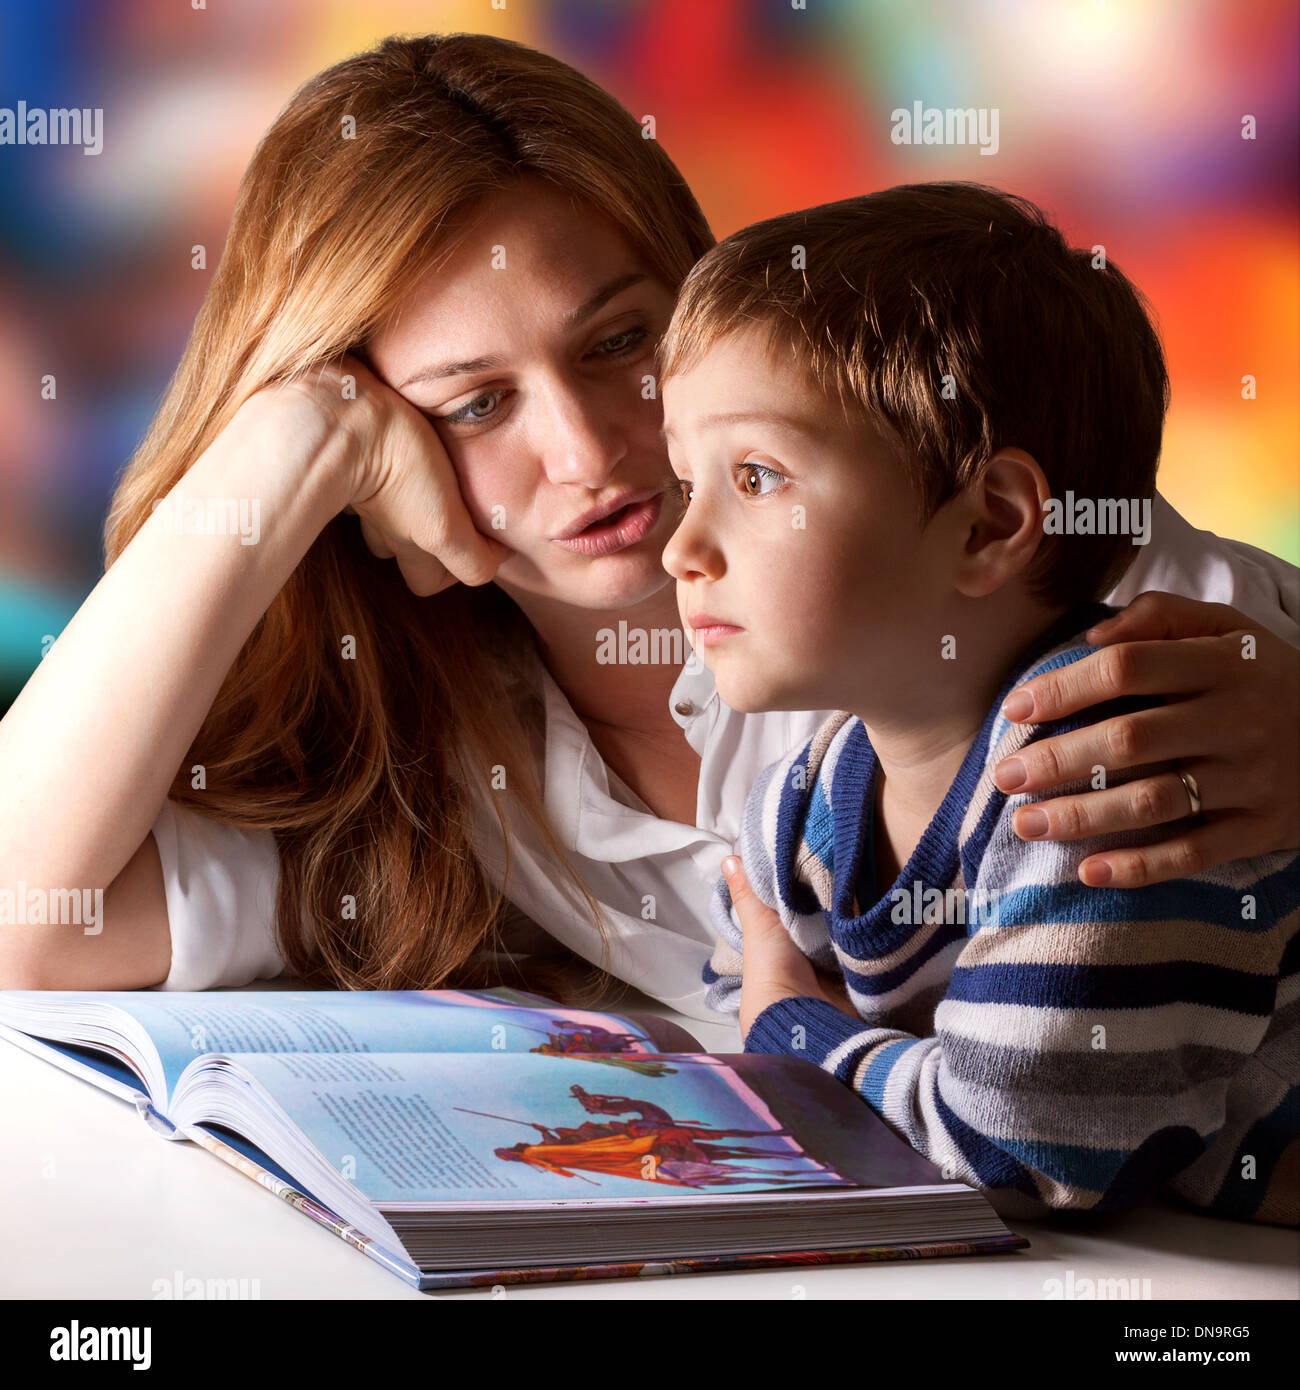 Little boy listening to his mother telling him stories Stock Photo